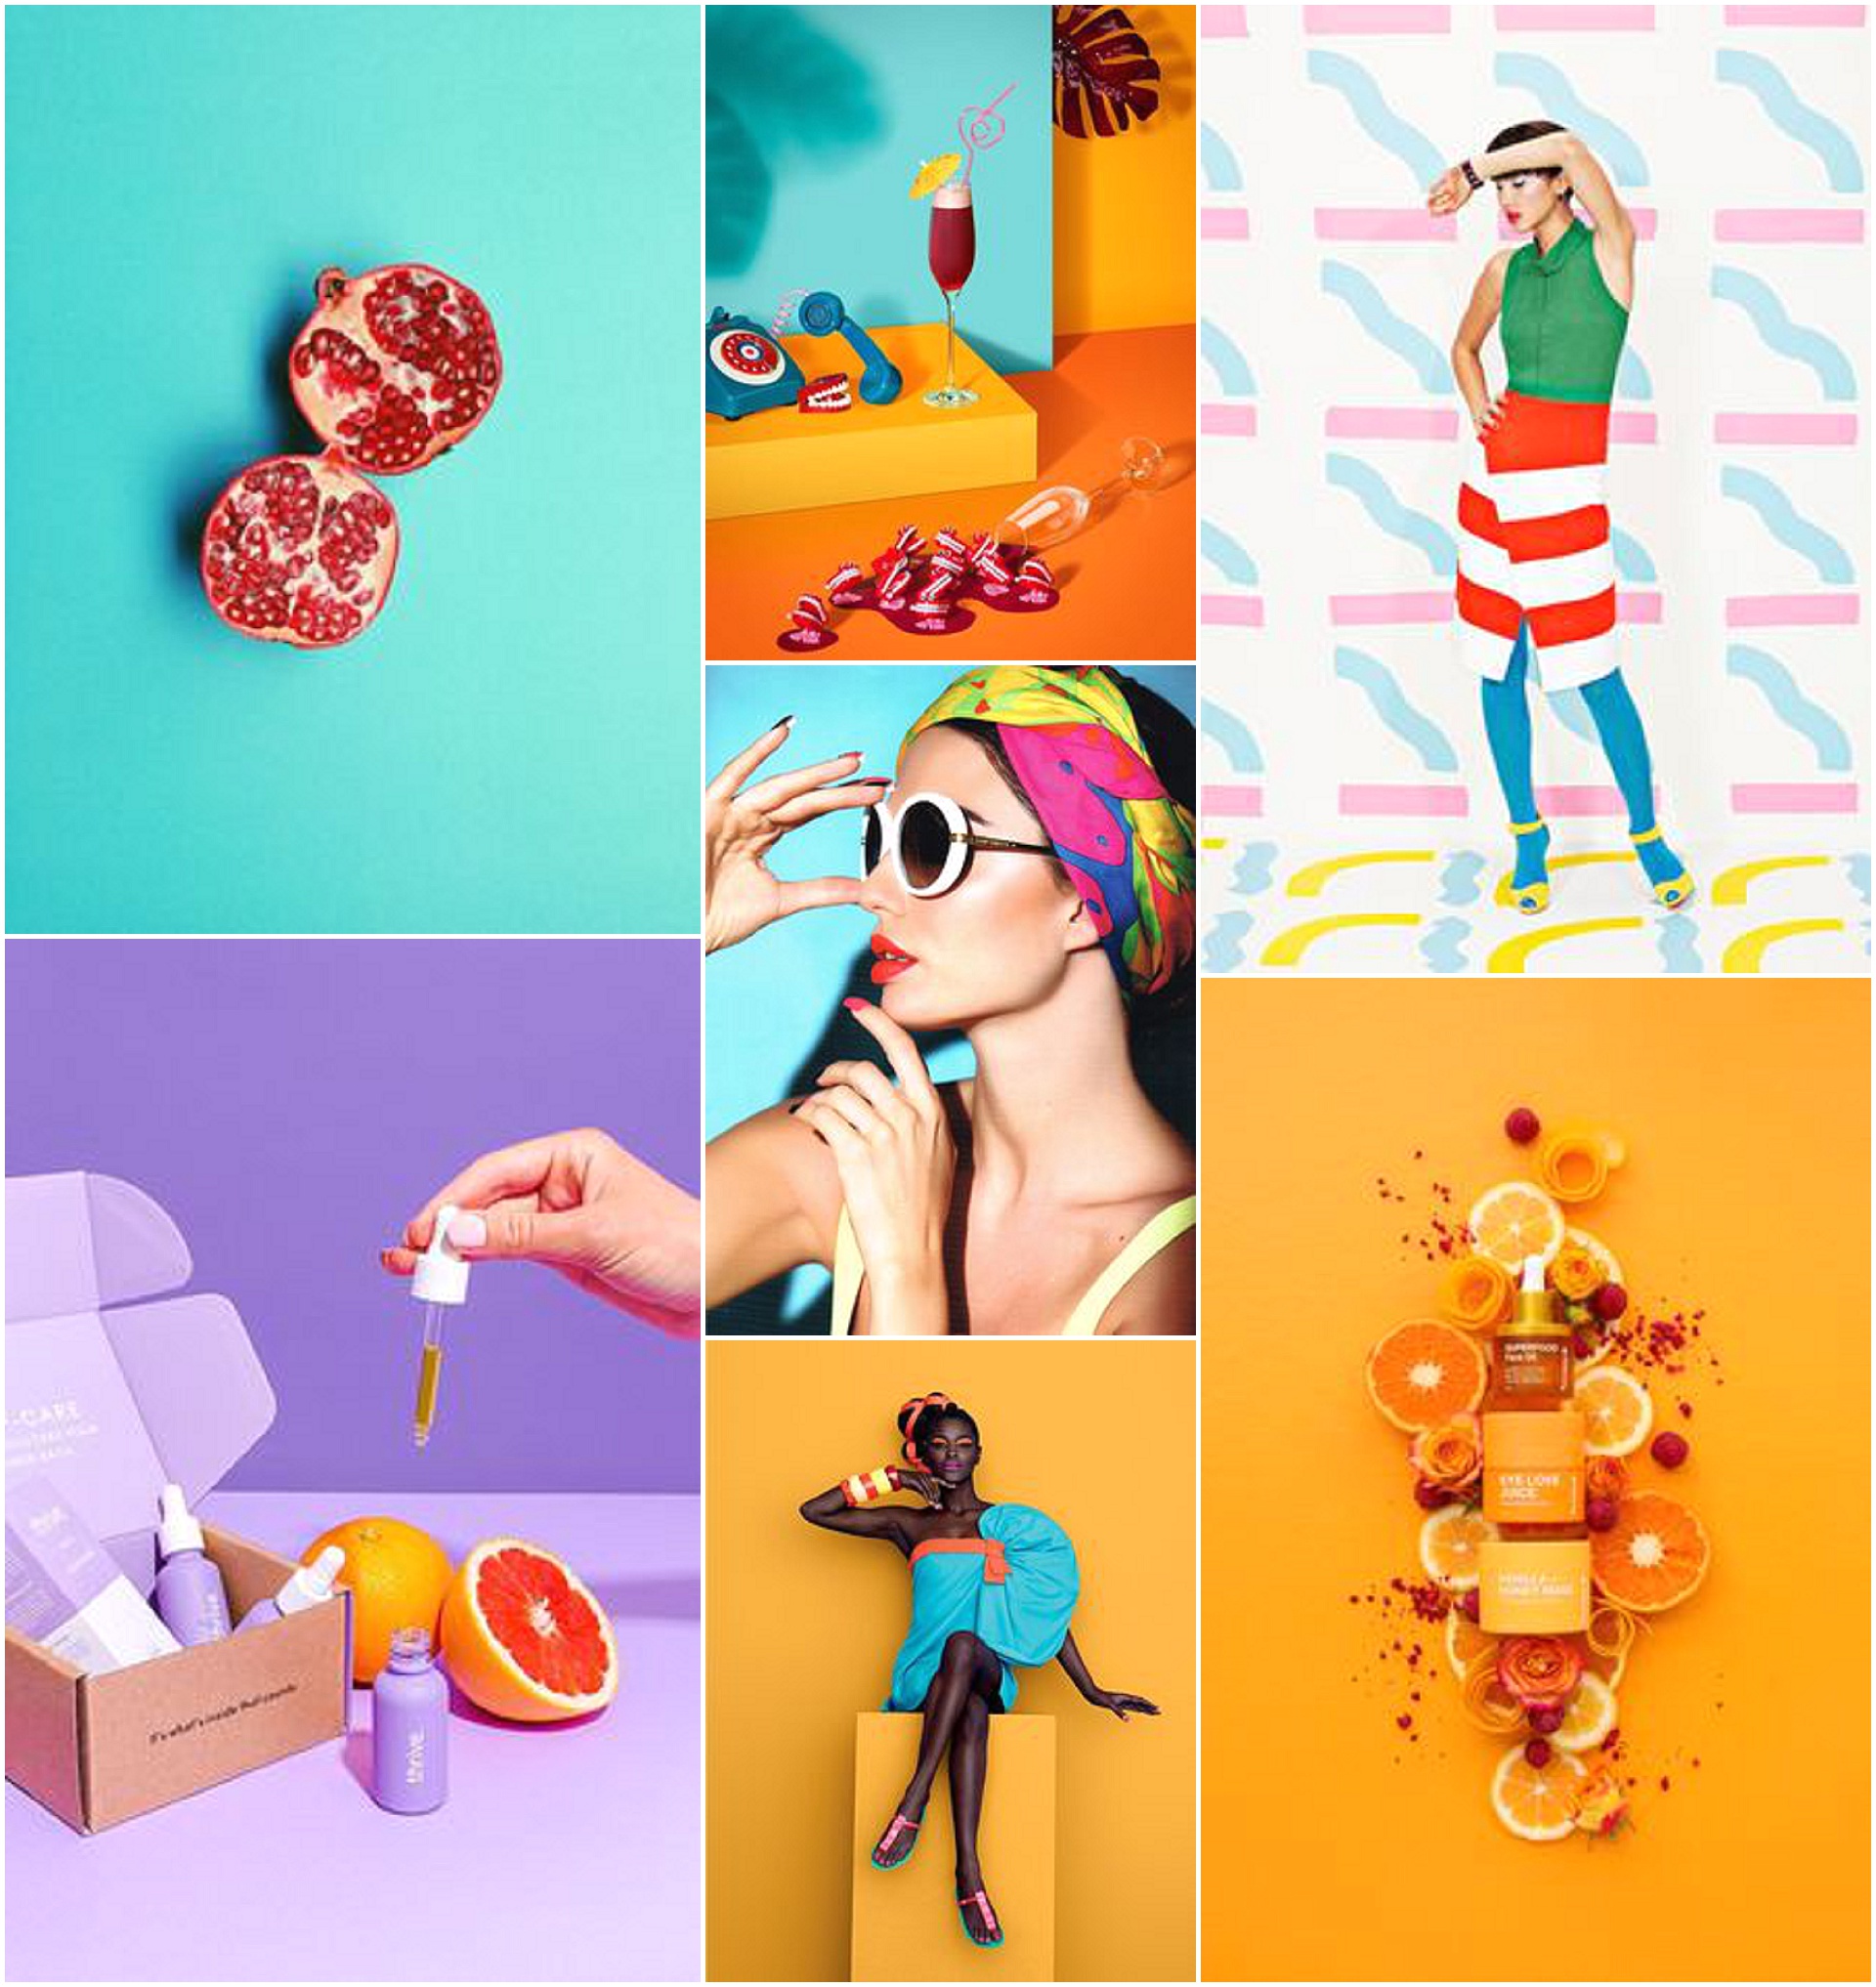 Brighten up your brand with colour pop photography by AKP Branding Stories.